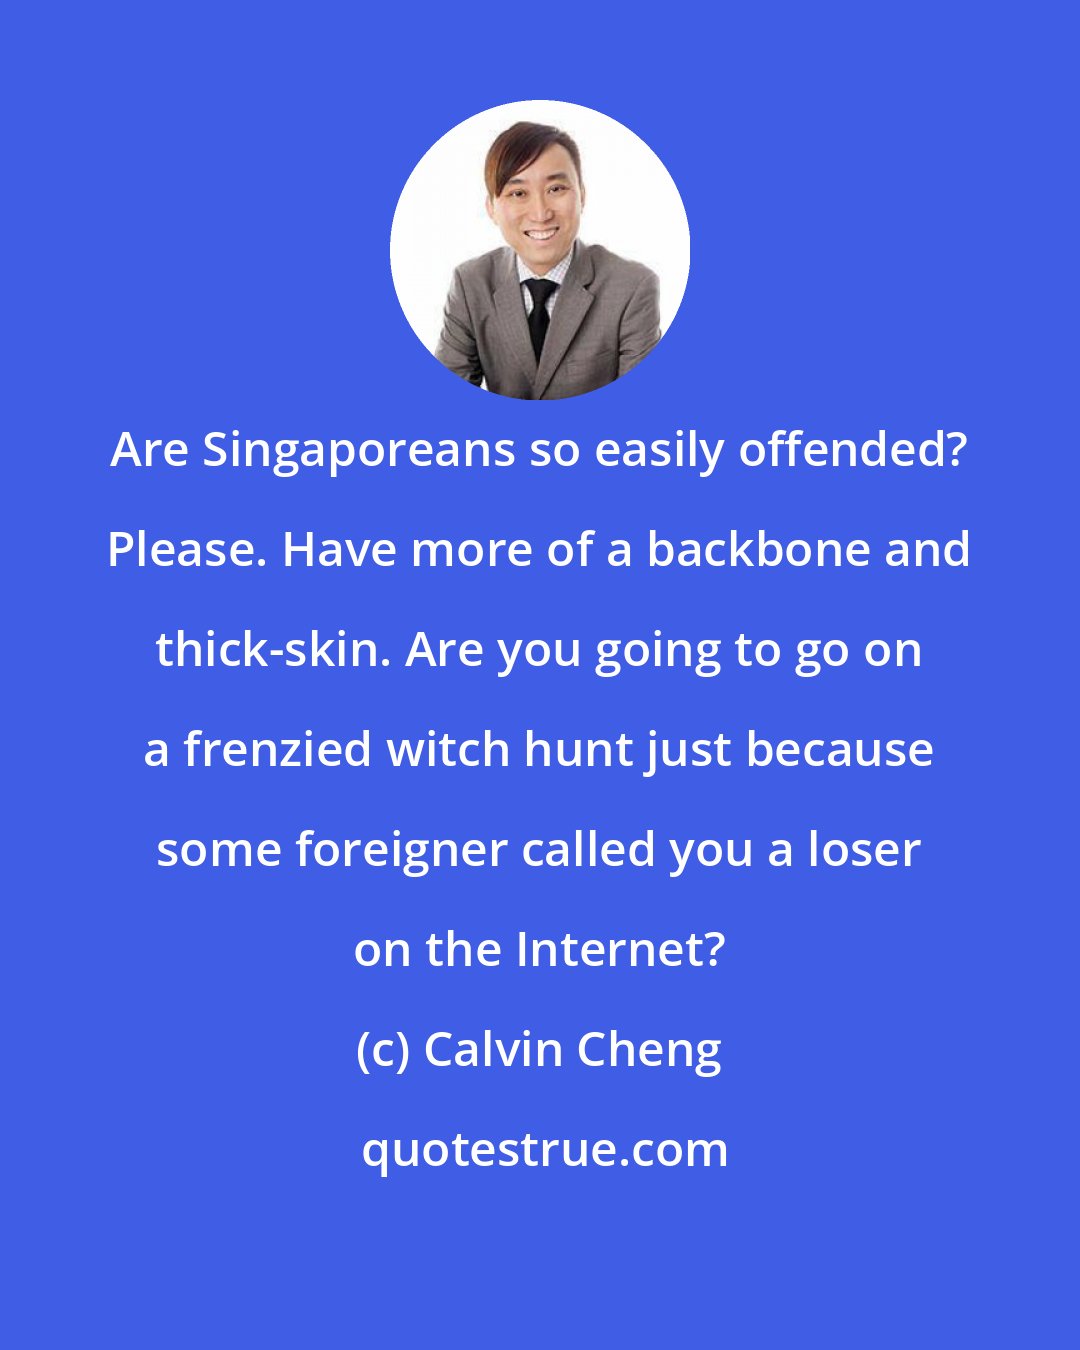 Calvin Cheng: Are Singaporeans so easily offended? Please. Have more of a backbone and thick-skin. Are you going to go on a frenzied witch hunt just because some foreigner called you a loser on the Internet?